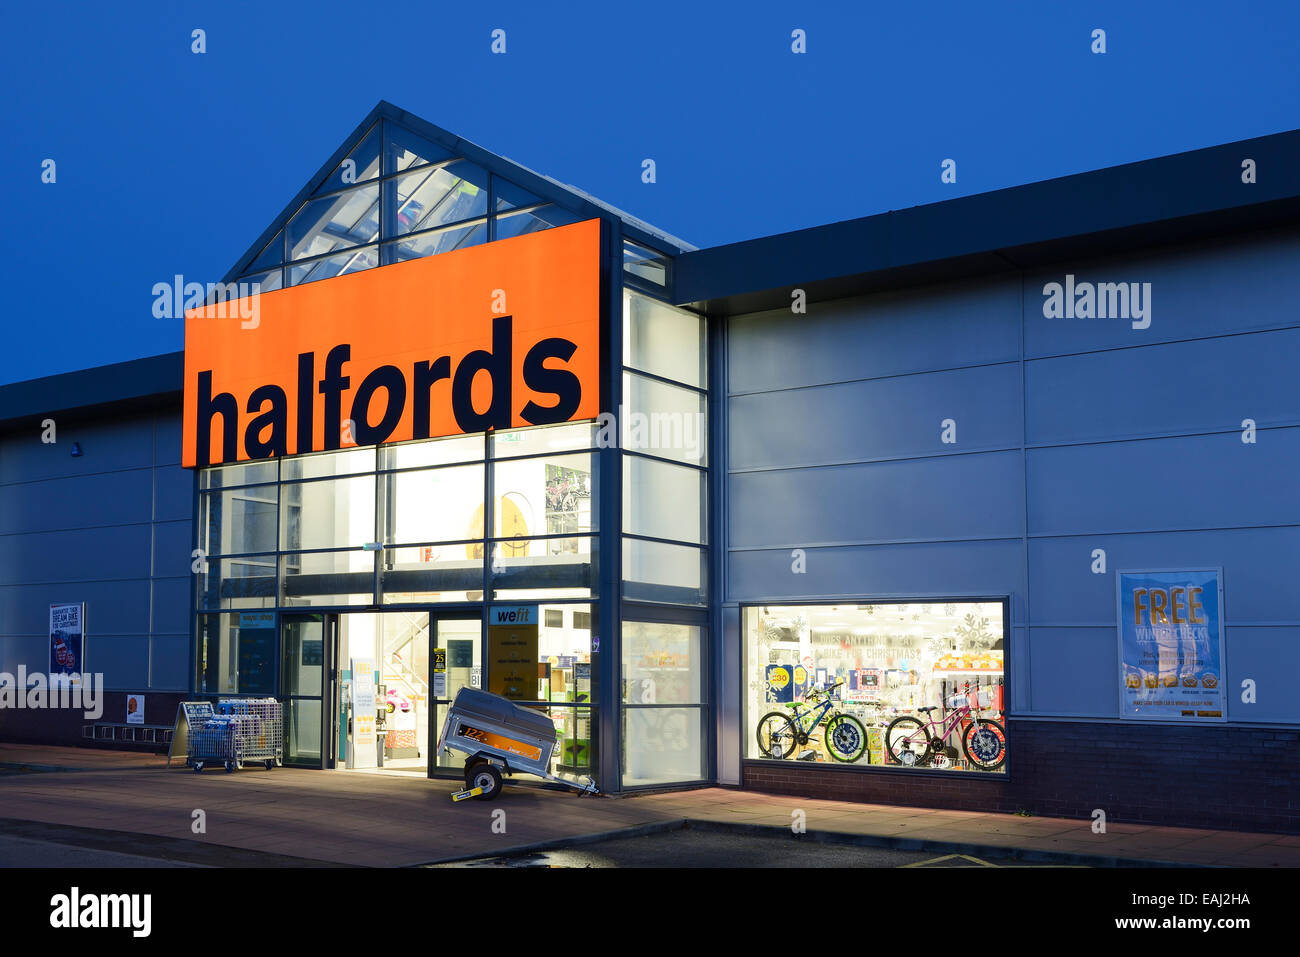 Halfords store entrance at night Stock Photo